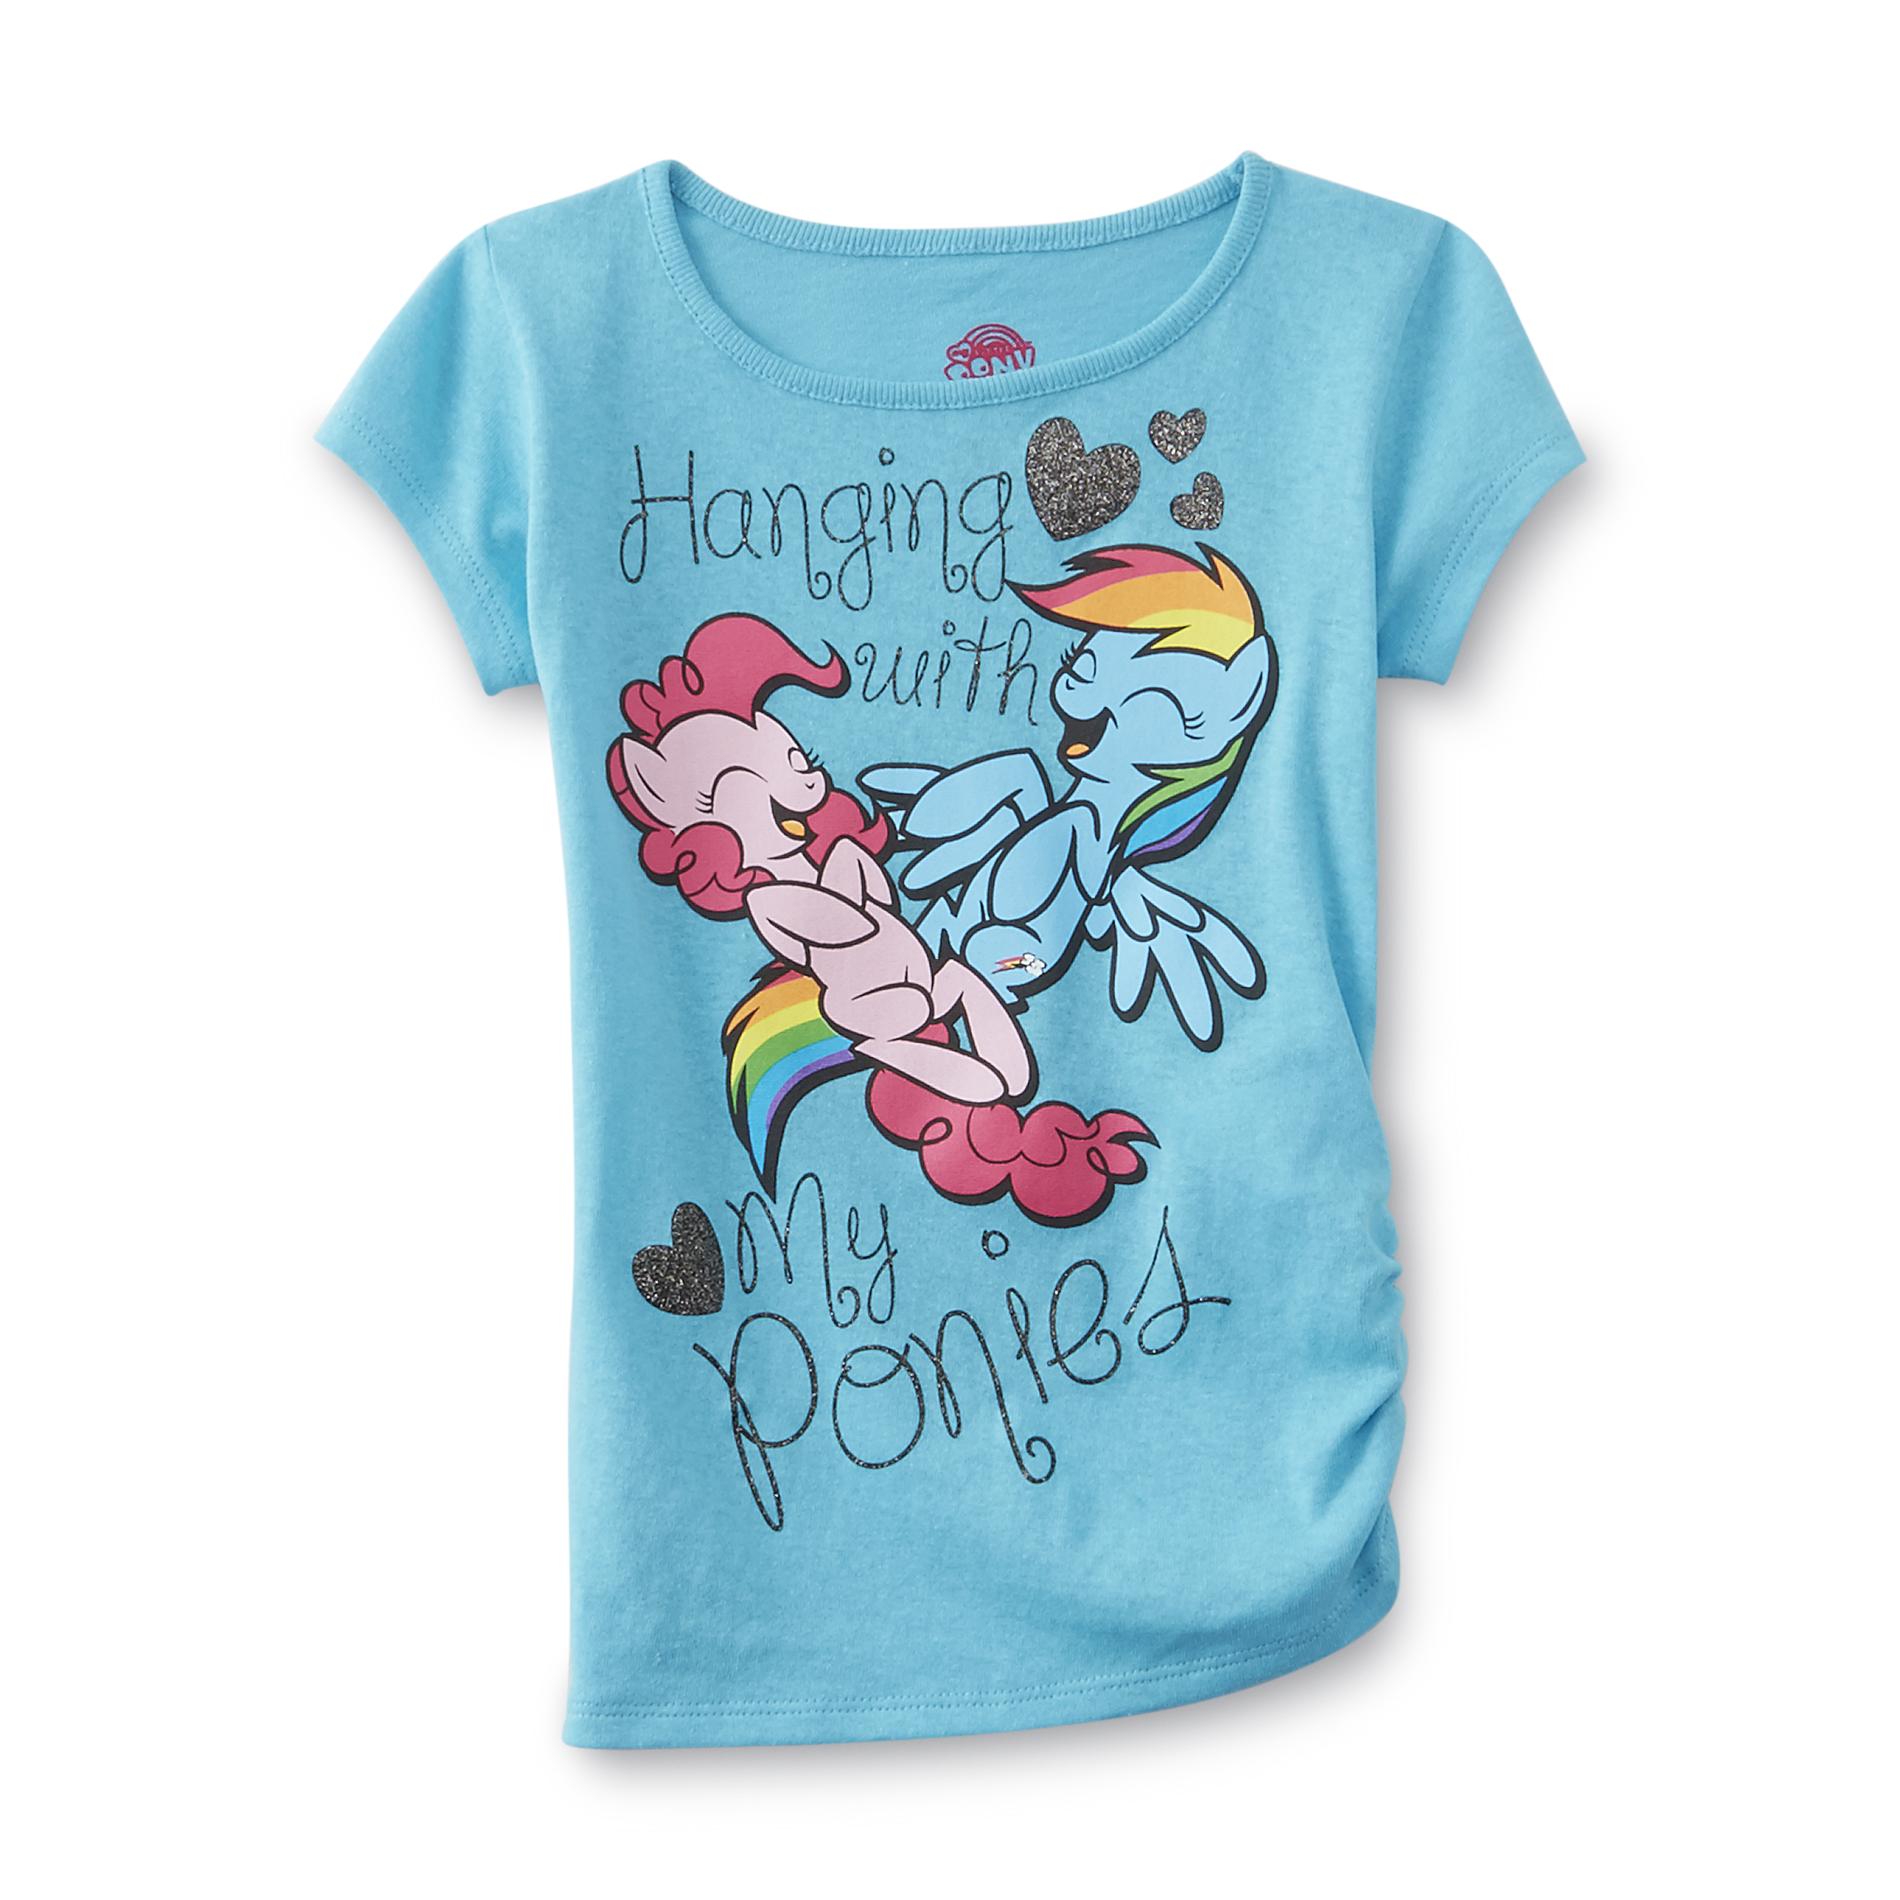 My Little Pony Girl's Graphic T-Shirt